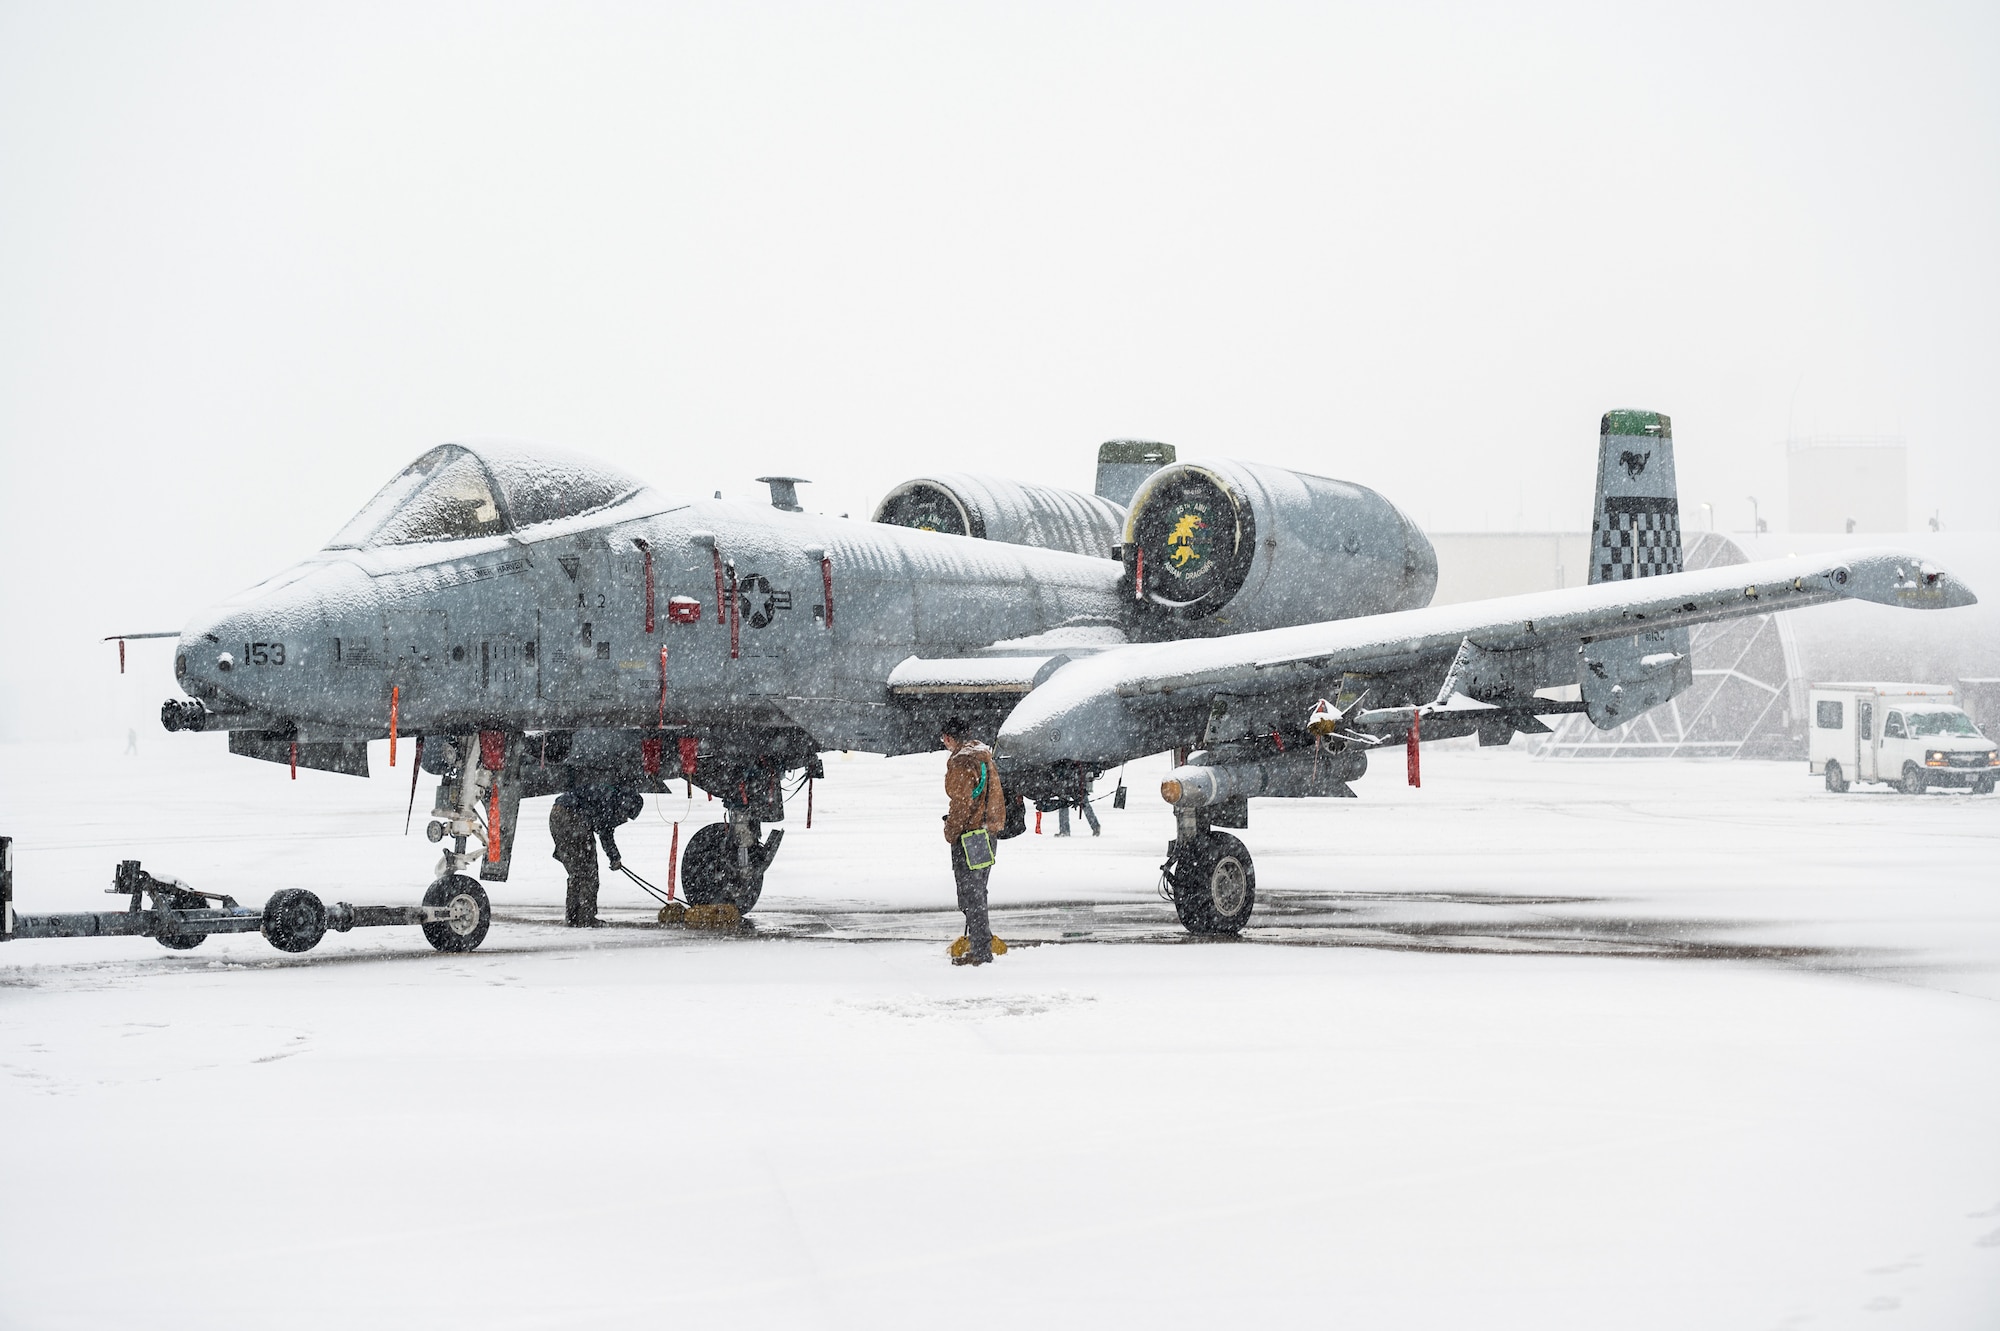 U.S. Air Force Staff Sgts. Ashlyn Brock and John-Michael Salenga, 25th Fighter Generation Squadron crew chiefs, remove chocks from an A-10C Thunderbolt II during an FGS training event